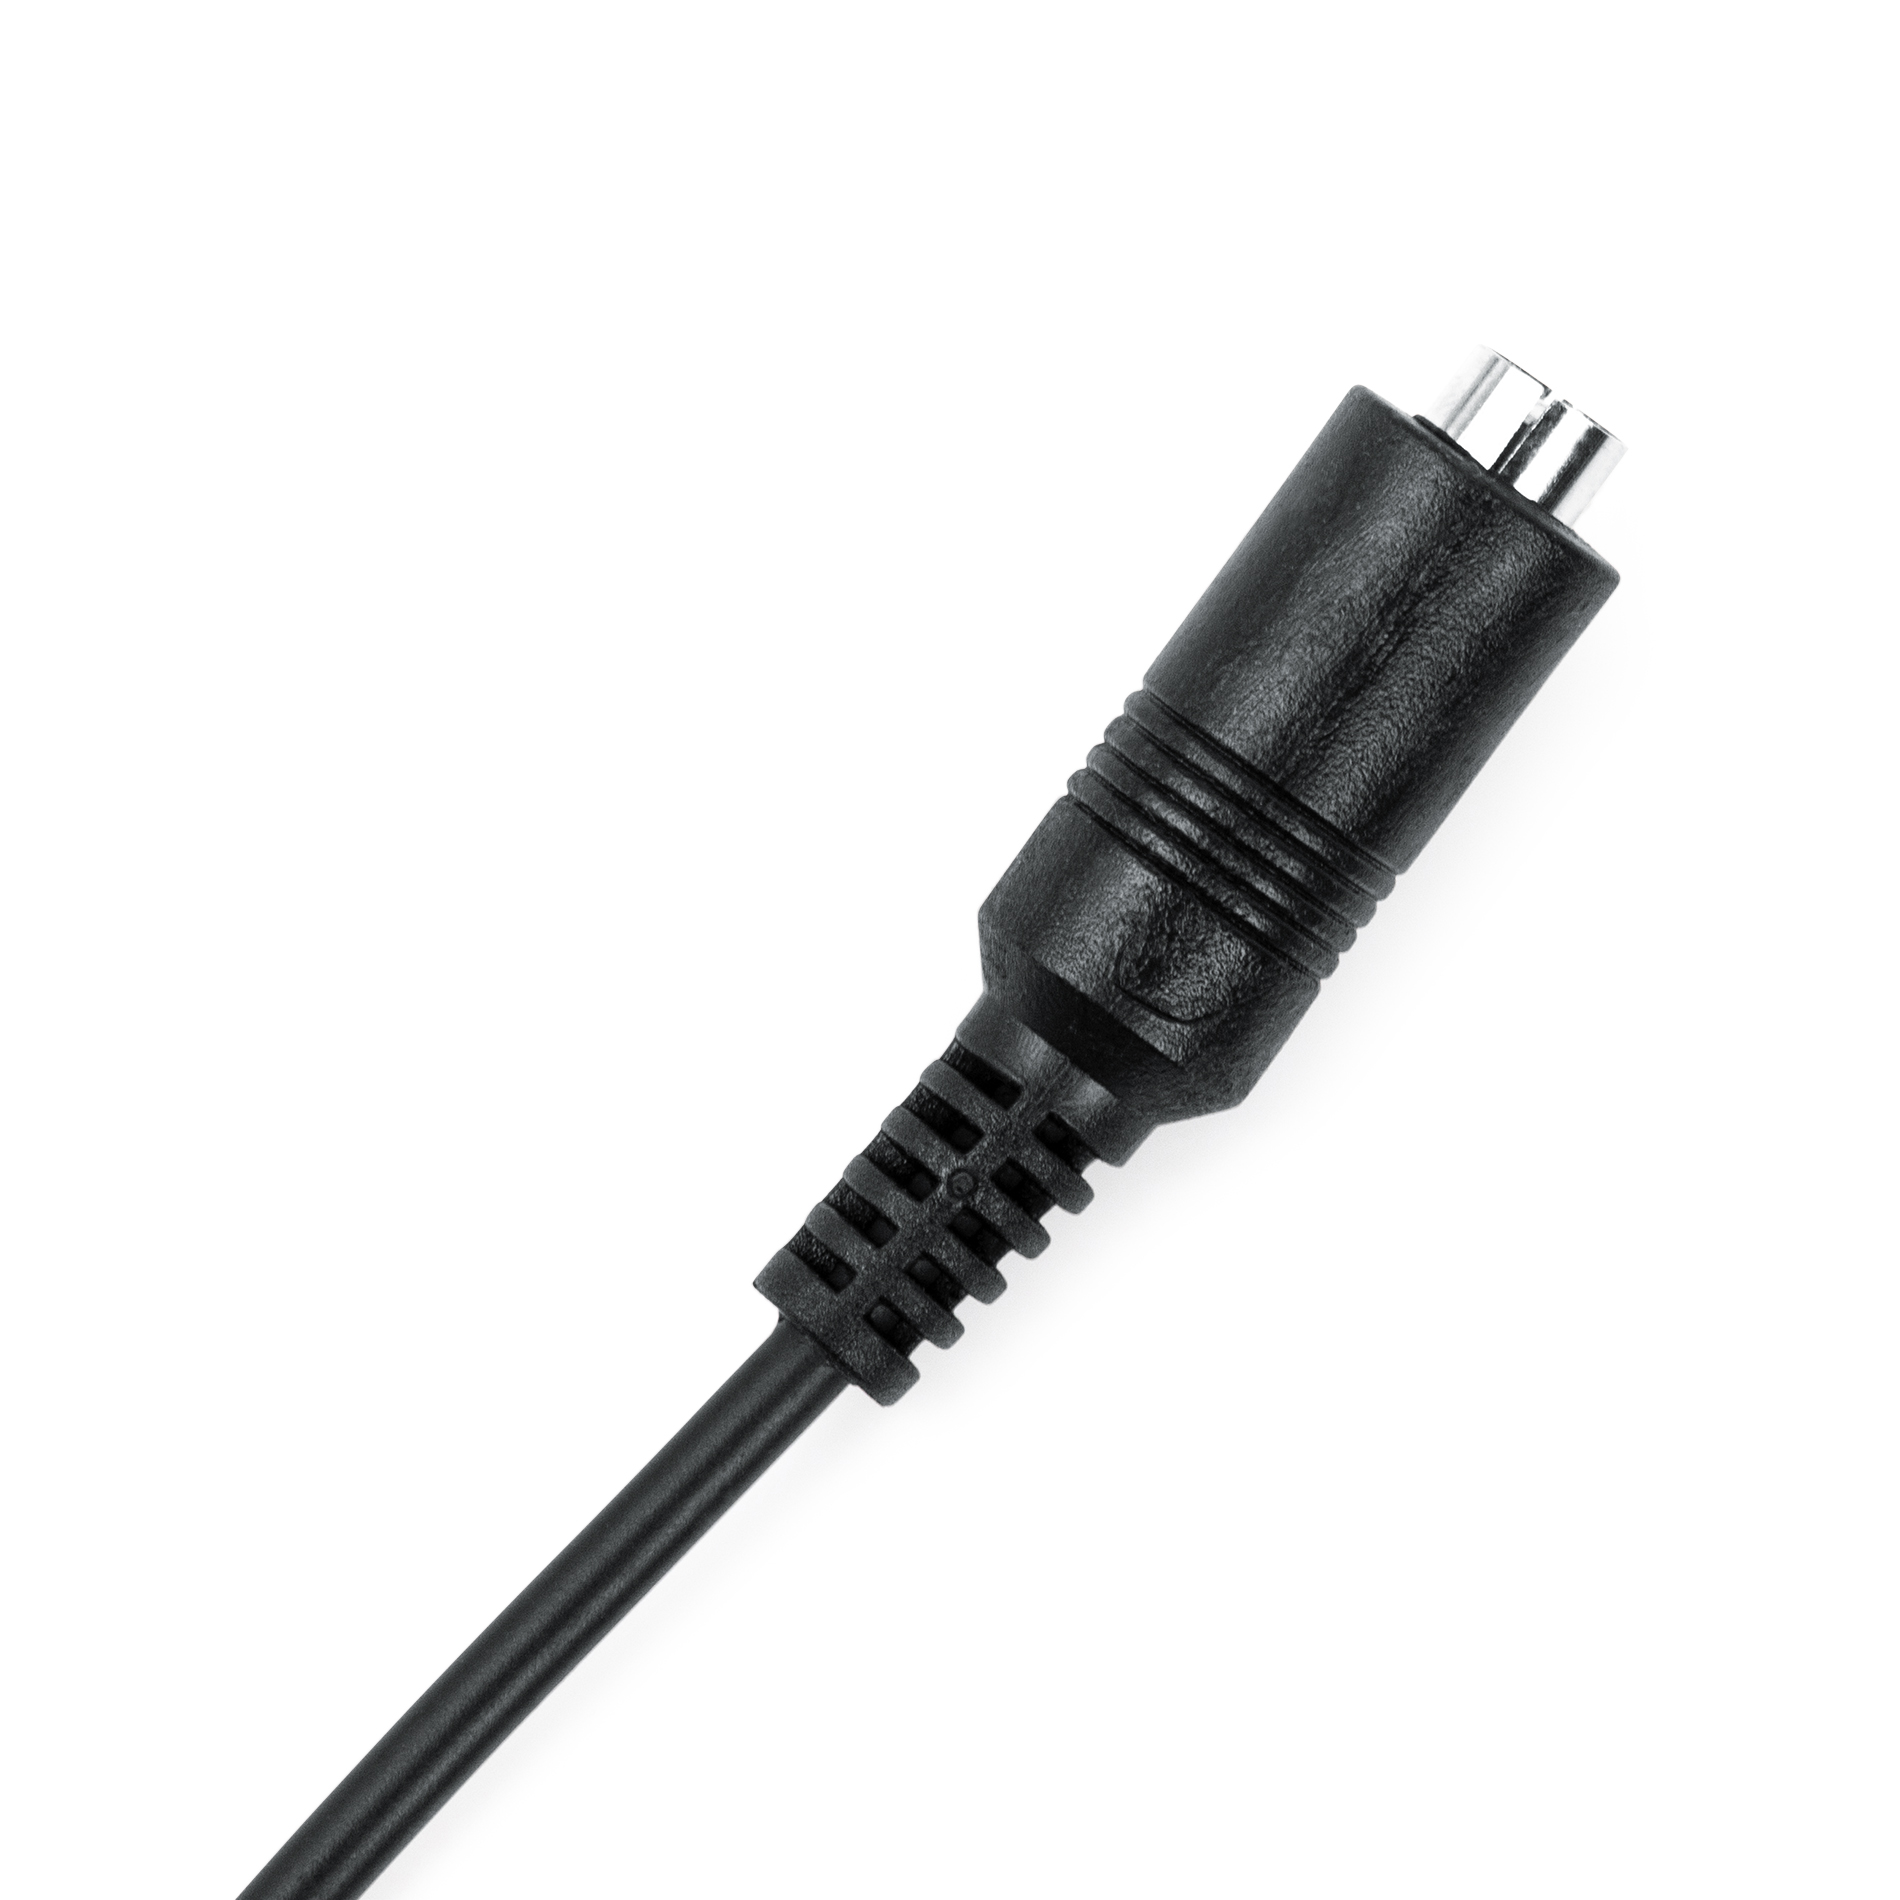 Female Daisy Chain Power Cable With 8 Outputs-GTR-PWR-DC8F